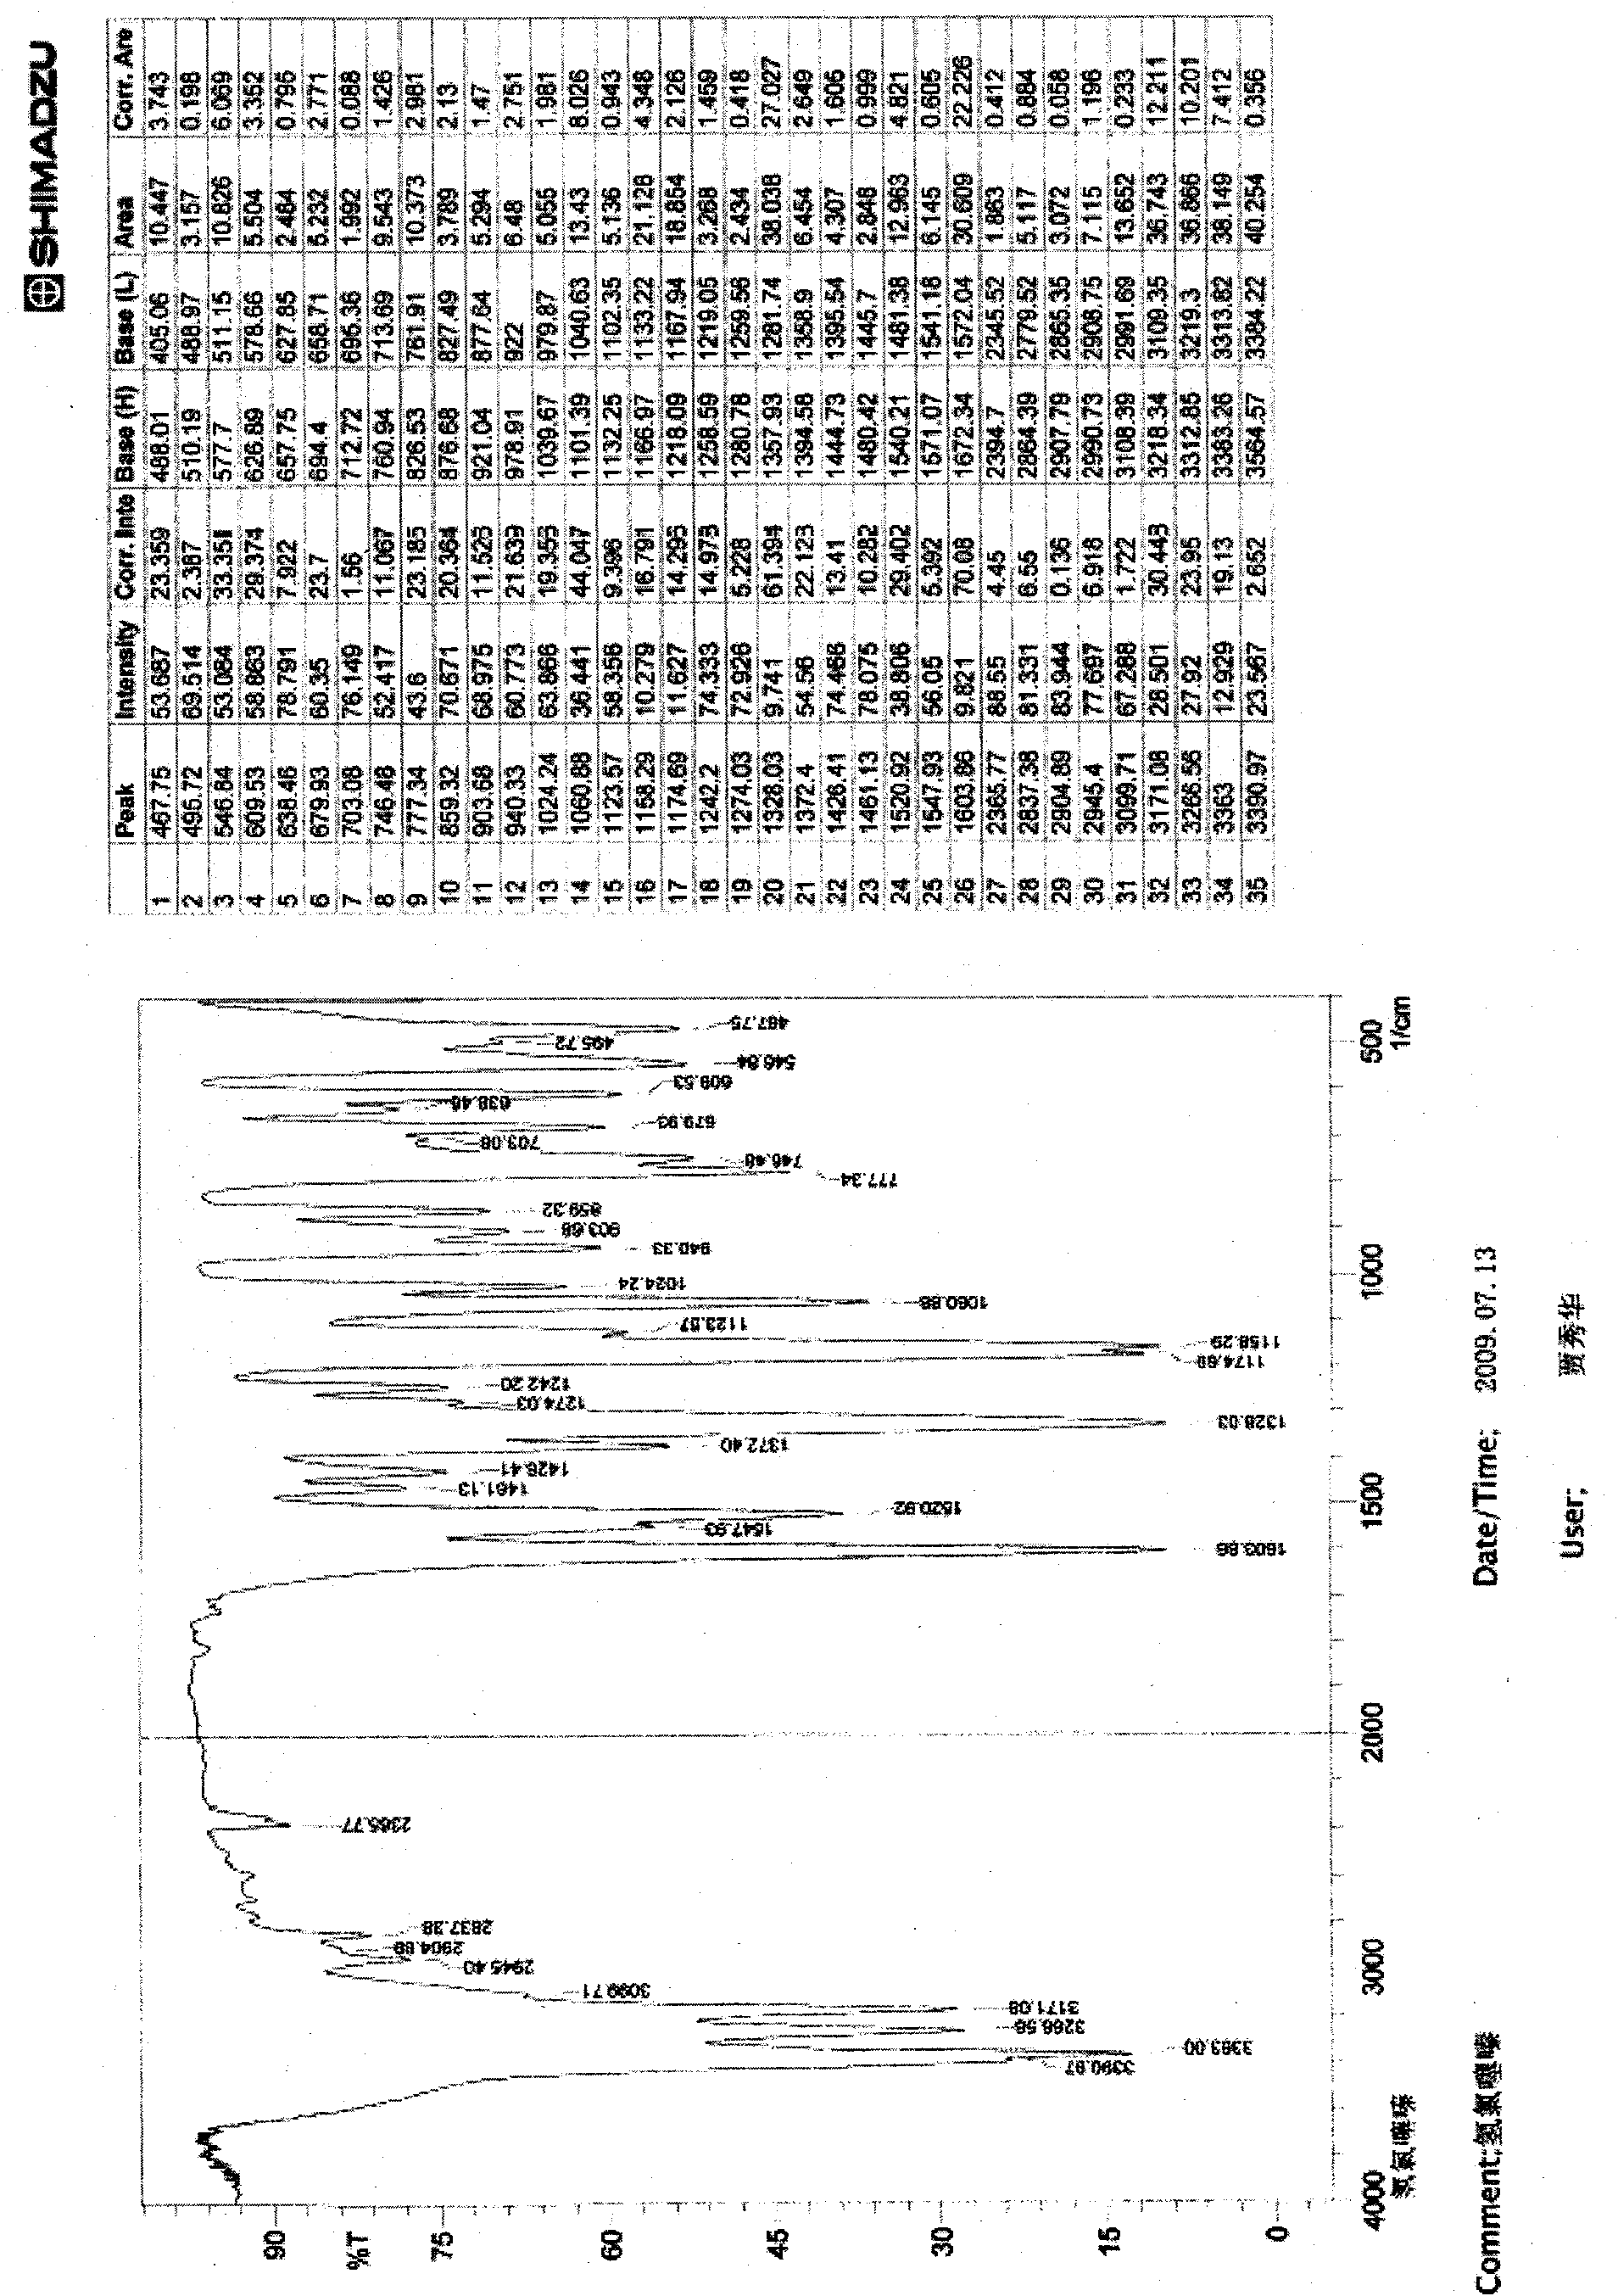 Crystalline form of hydrochlorothiazide and application thereof